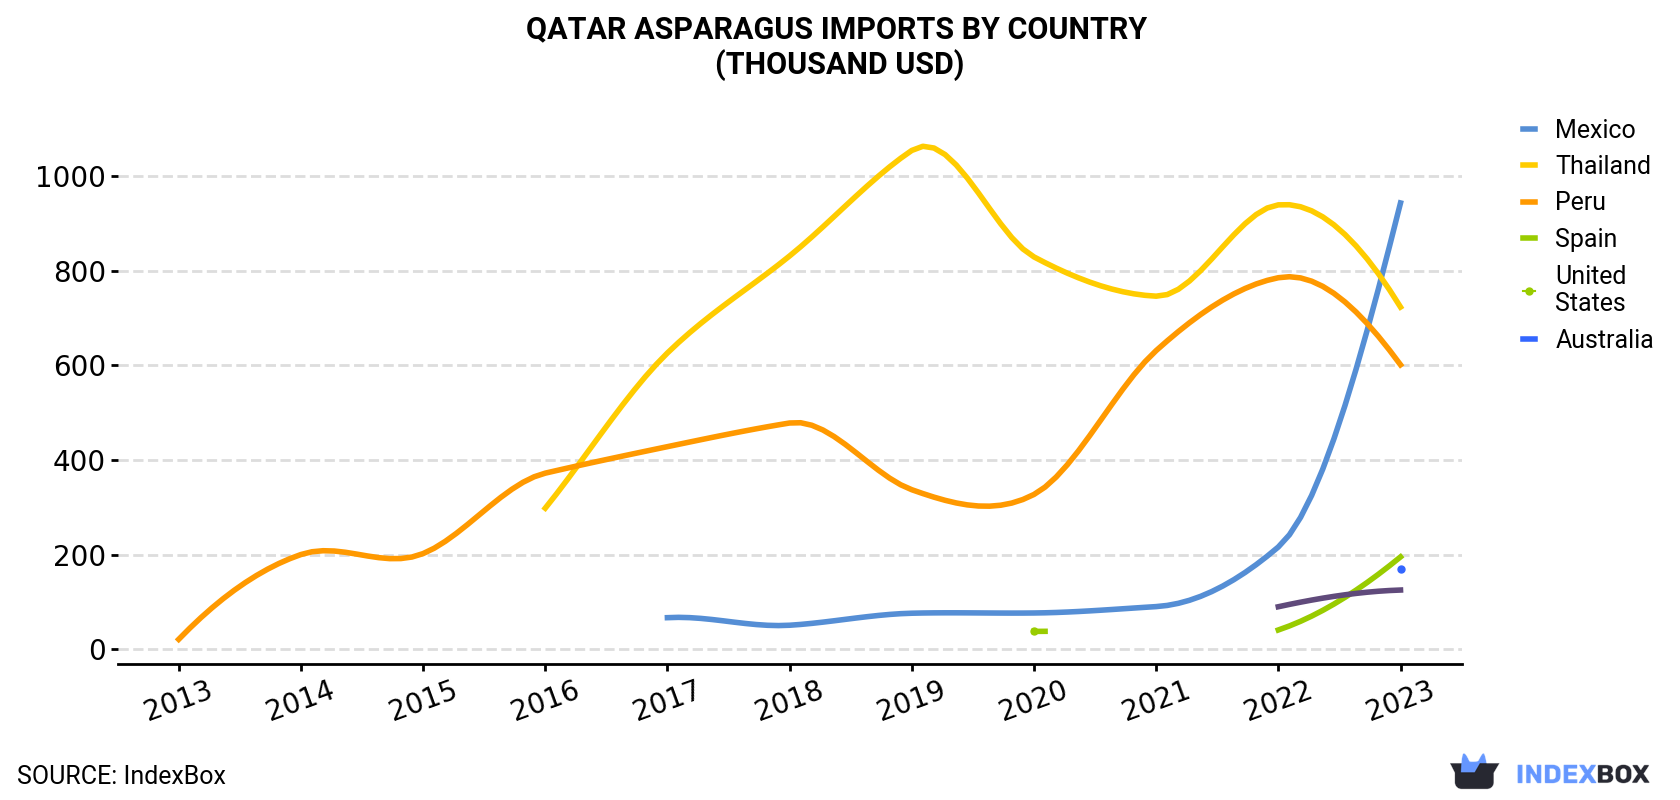 Qatar Asparagus Imports By Country (Thousand USD)